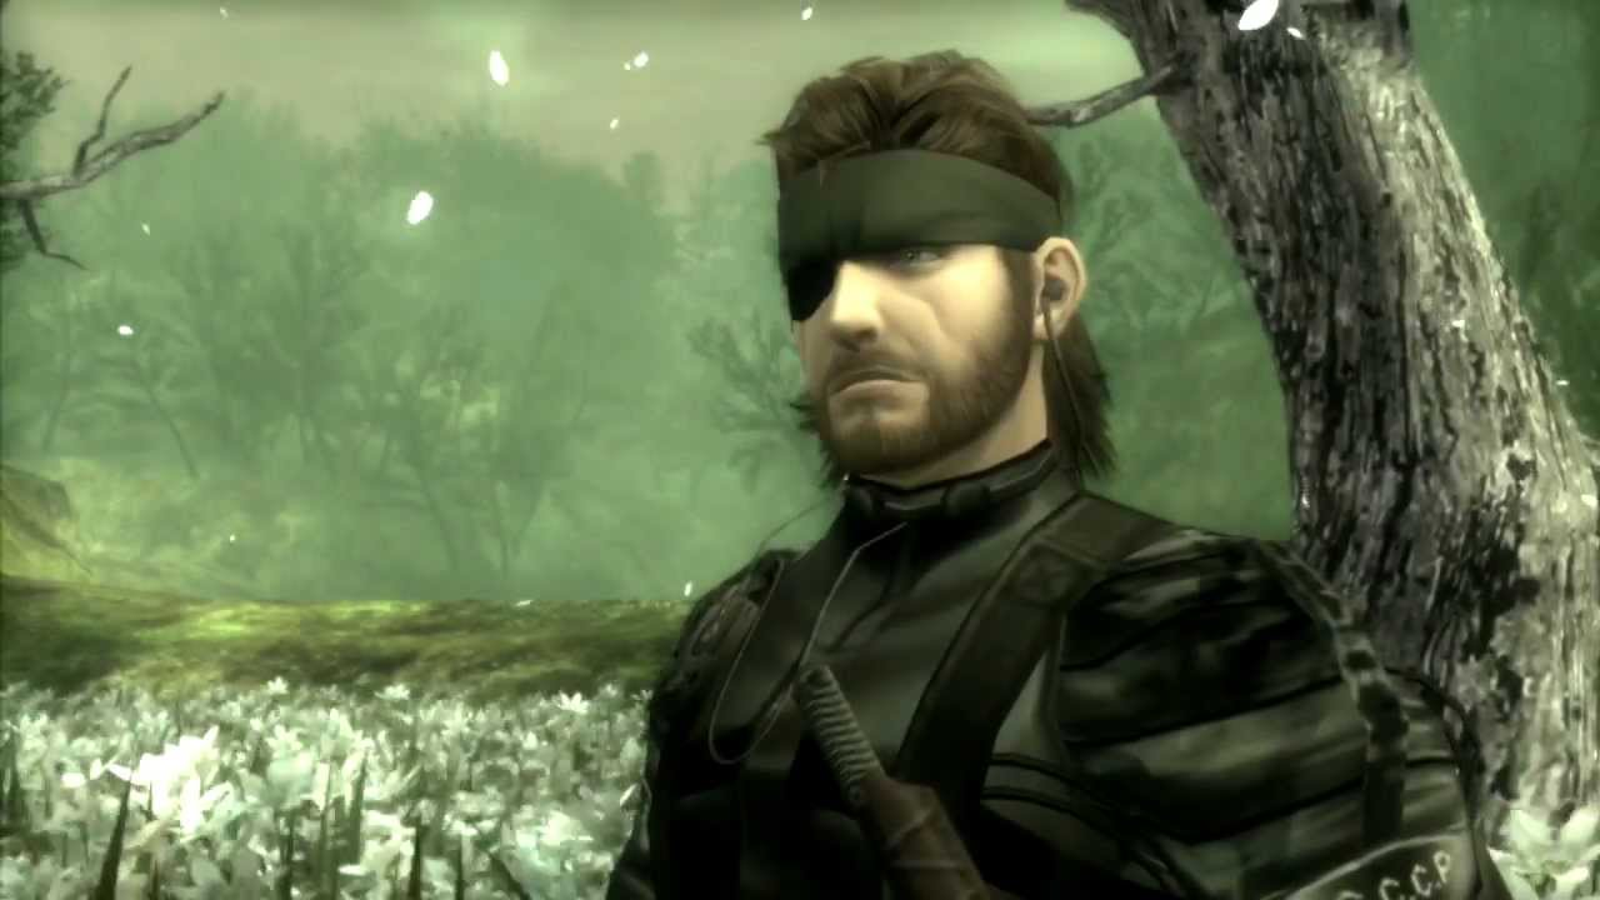 Metal Gear Solid 3 Remake's Official Name Is Metal Gear Solid Delta (Δ) -  Gameranx